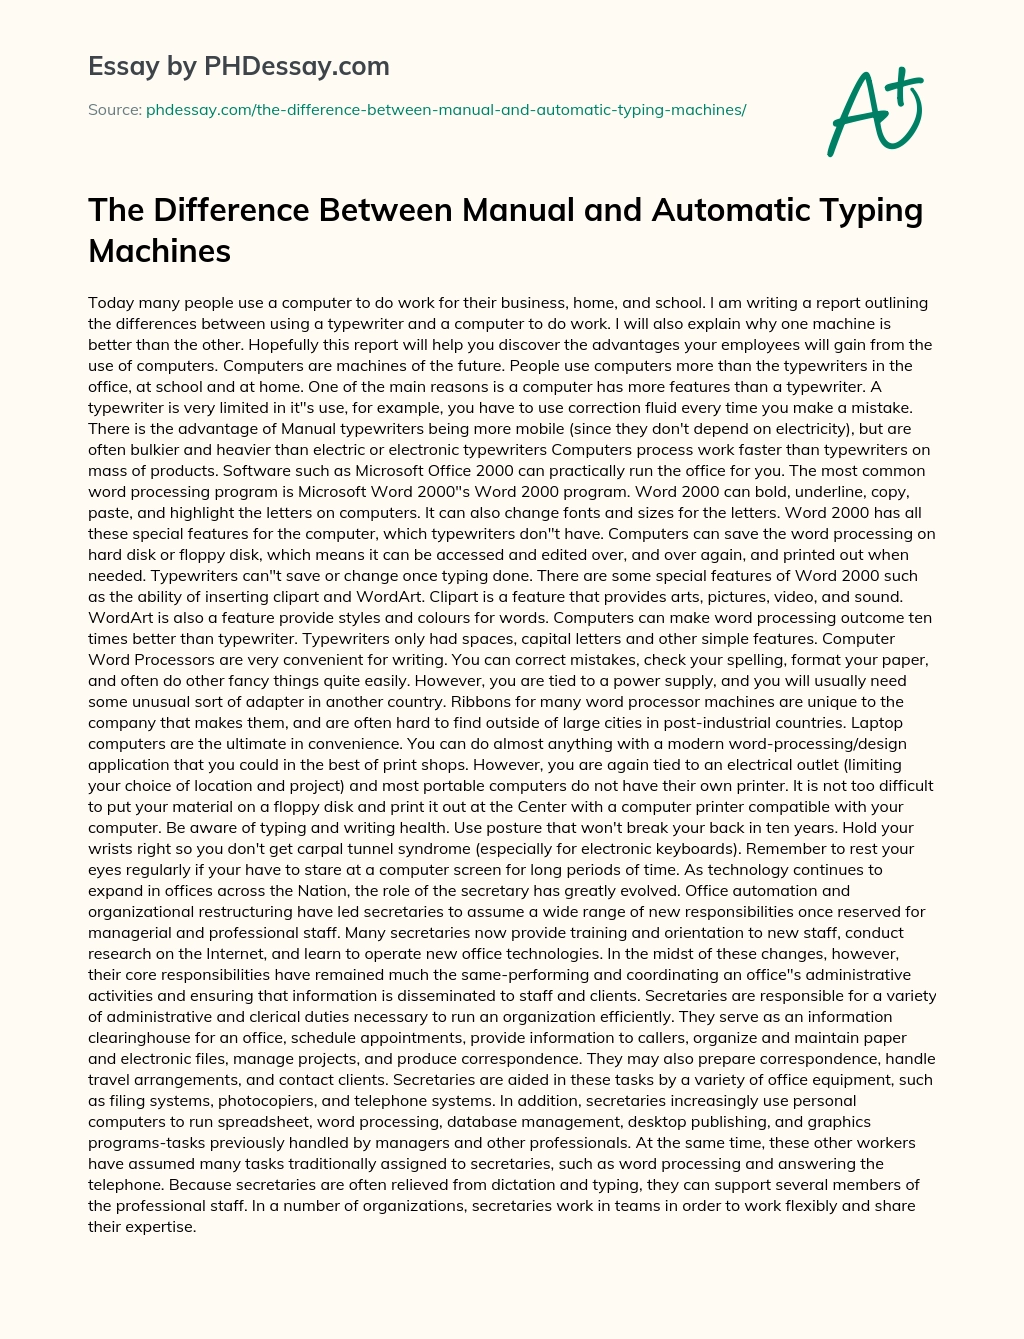 The Difference Between Manual and Automatic Typing Machines essay